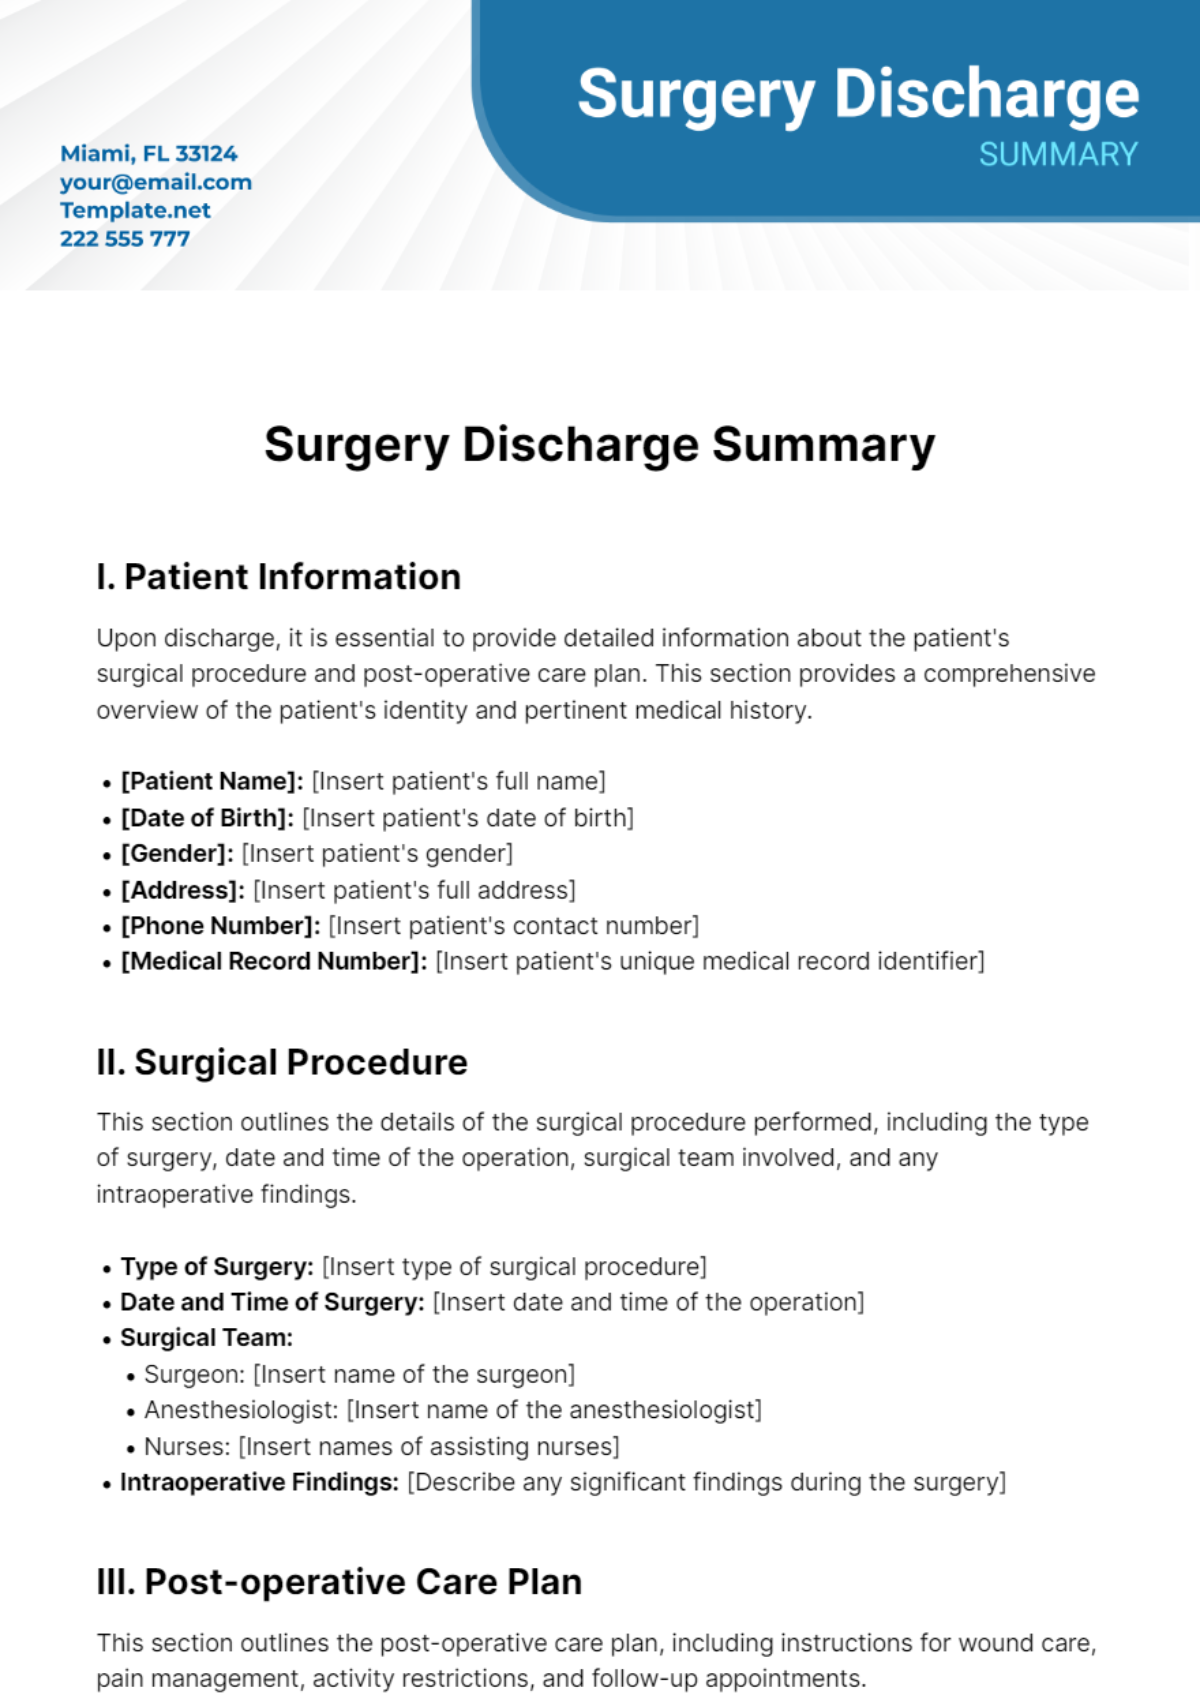 Free Surgery Discharge Summary Template